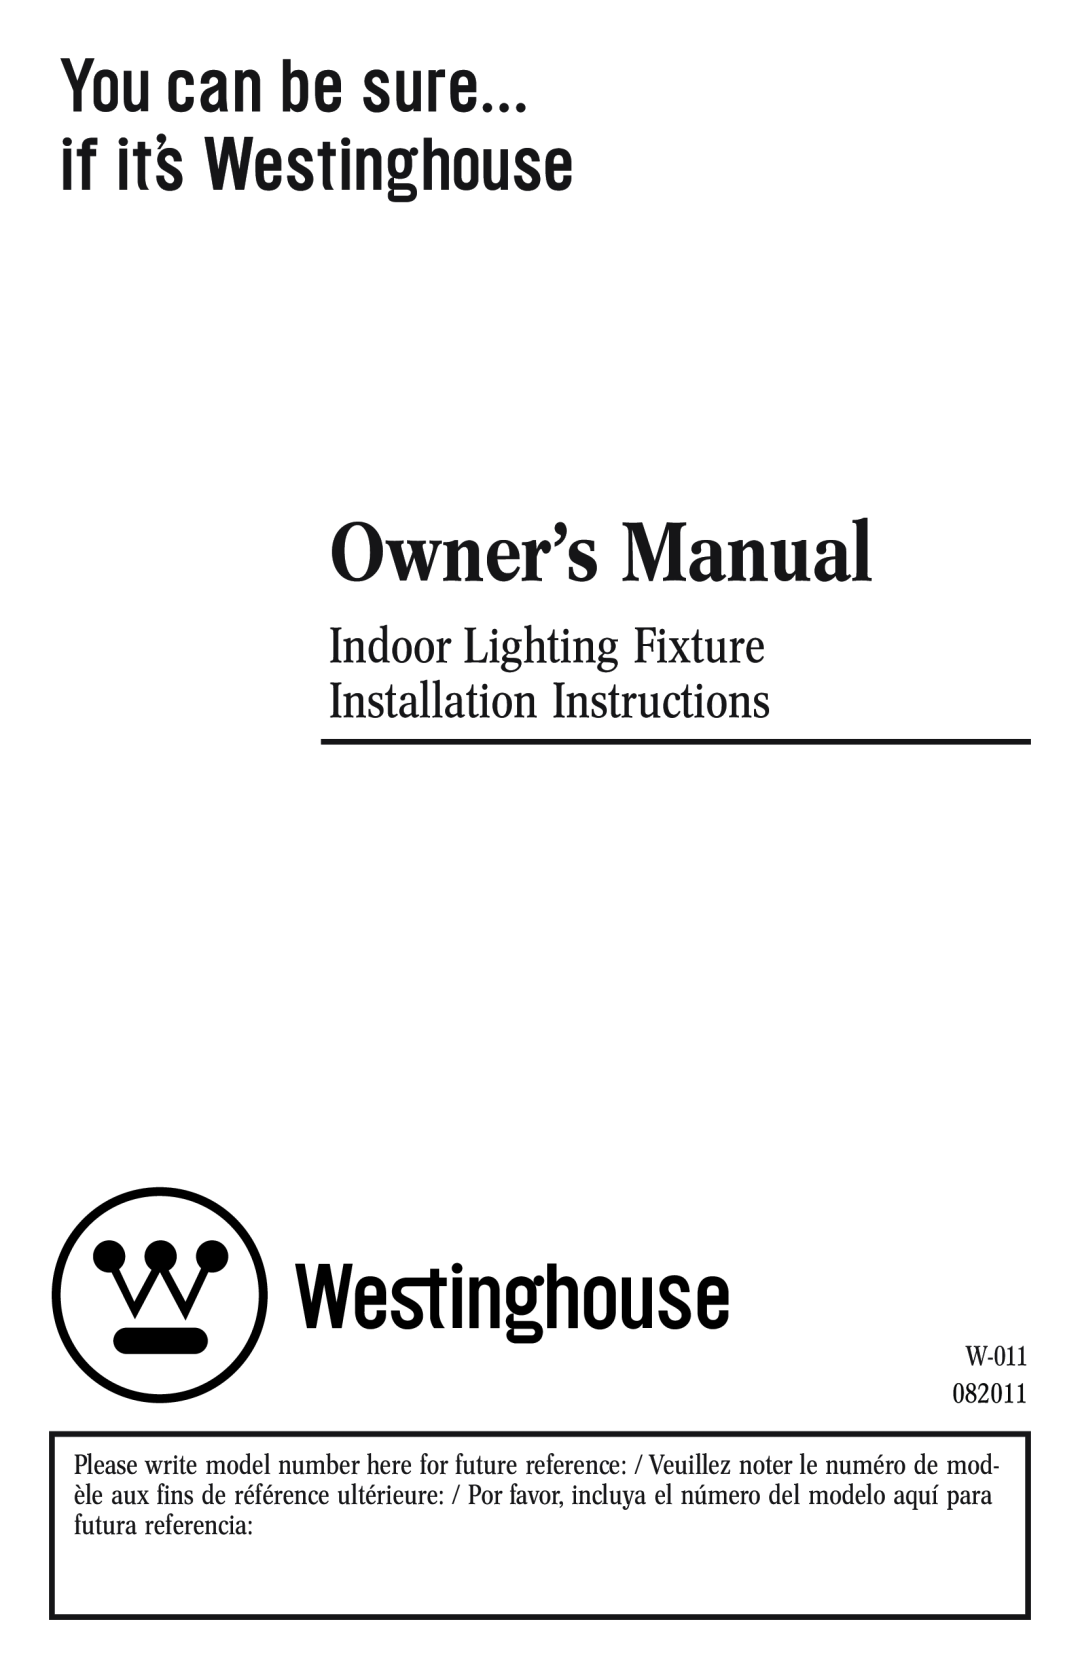 Westinghouse 82011 owner manual Indoor Lighting Fixture Installation Instructions 